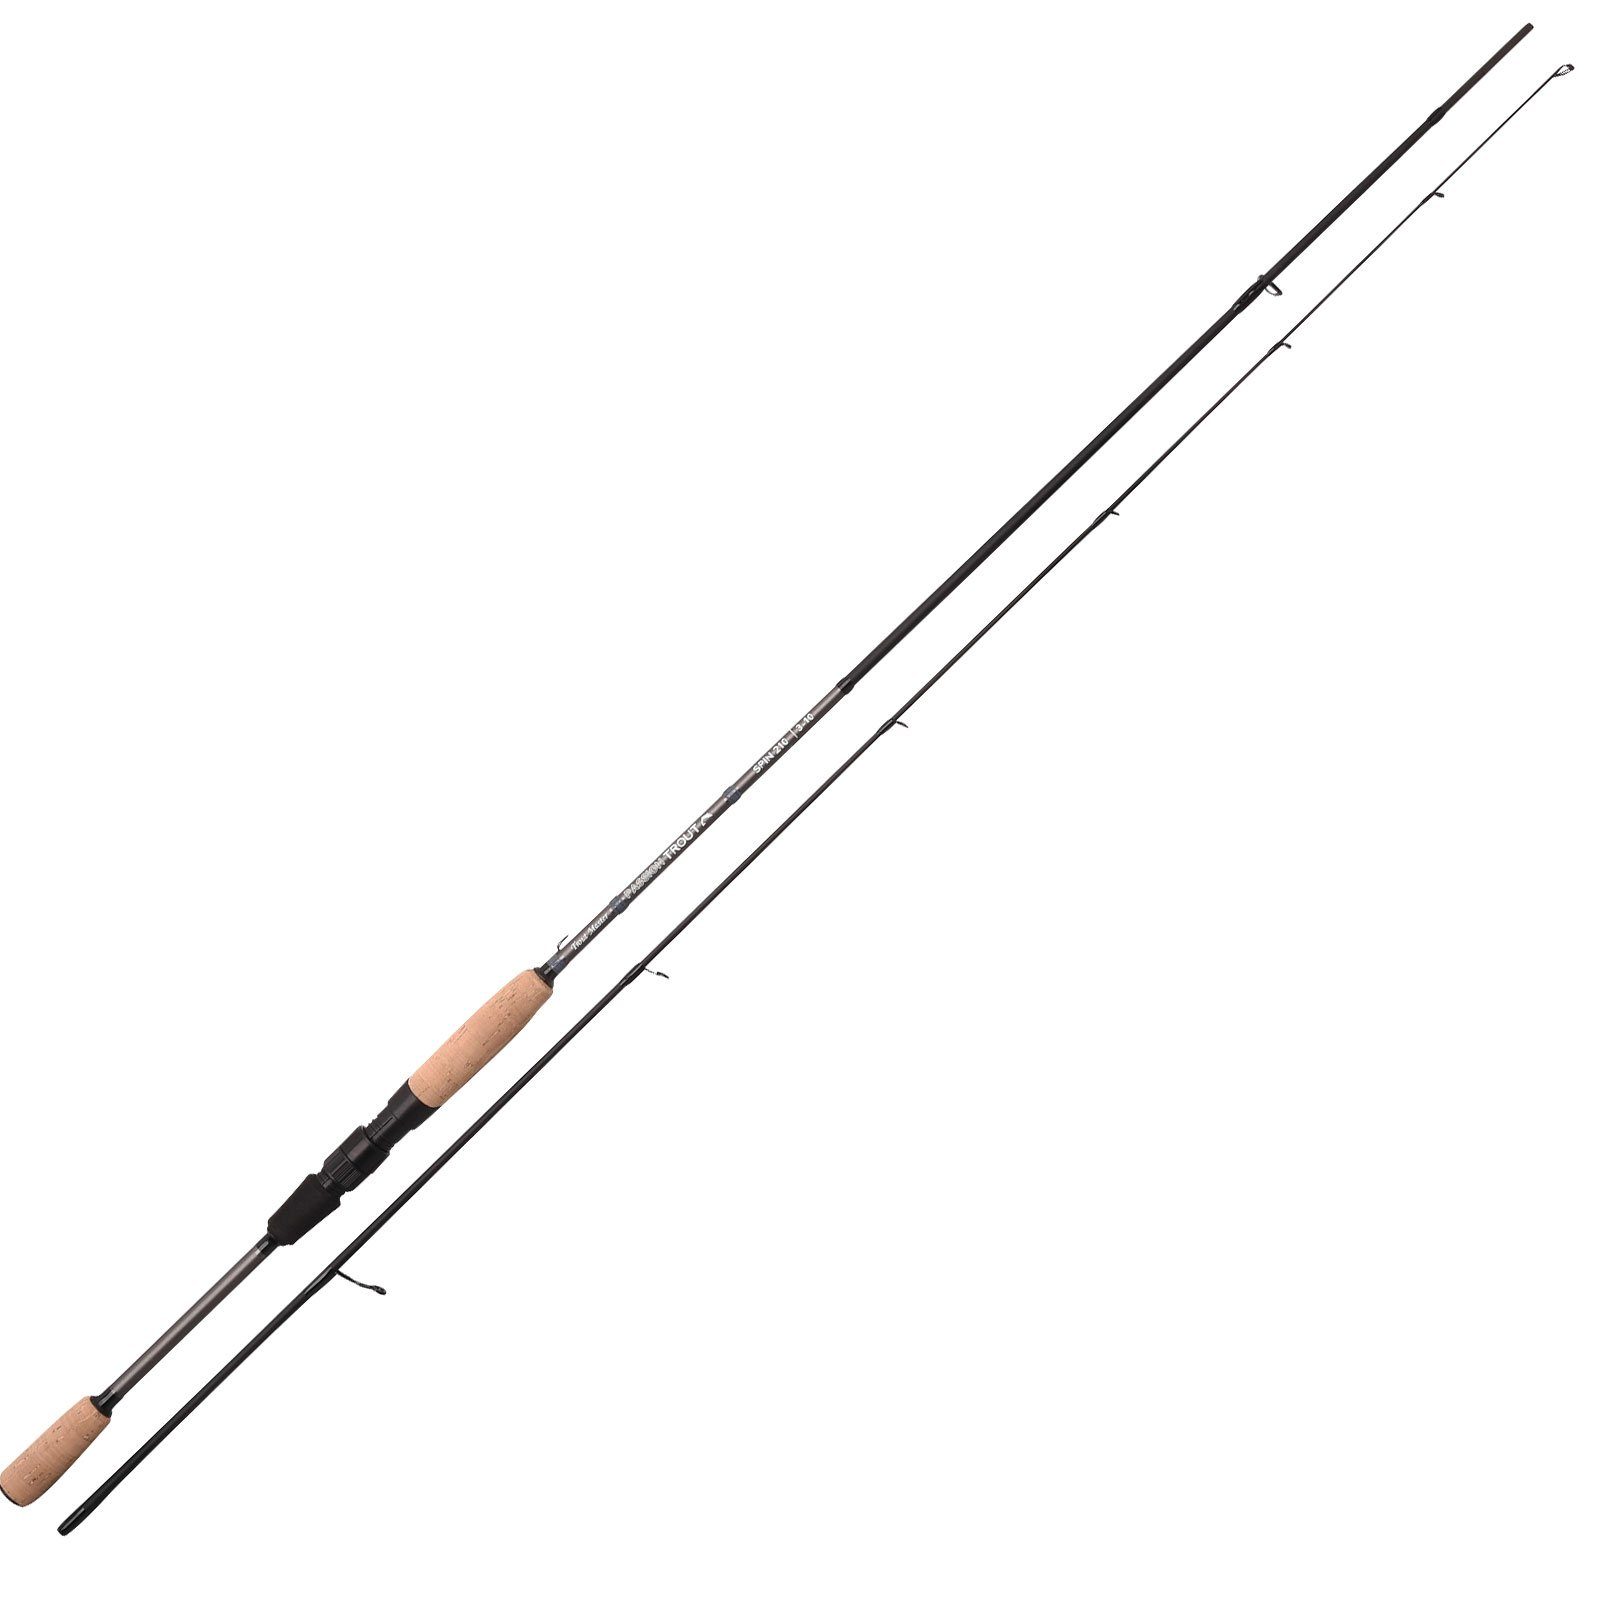 SPRO Forellenrute, (2-tlg), Spro Trout Master Passion Trout Spin 2.40m 3-10g Forellenrute 5-20